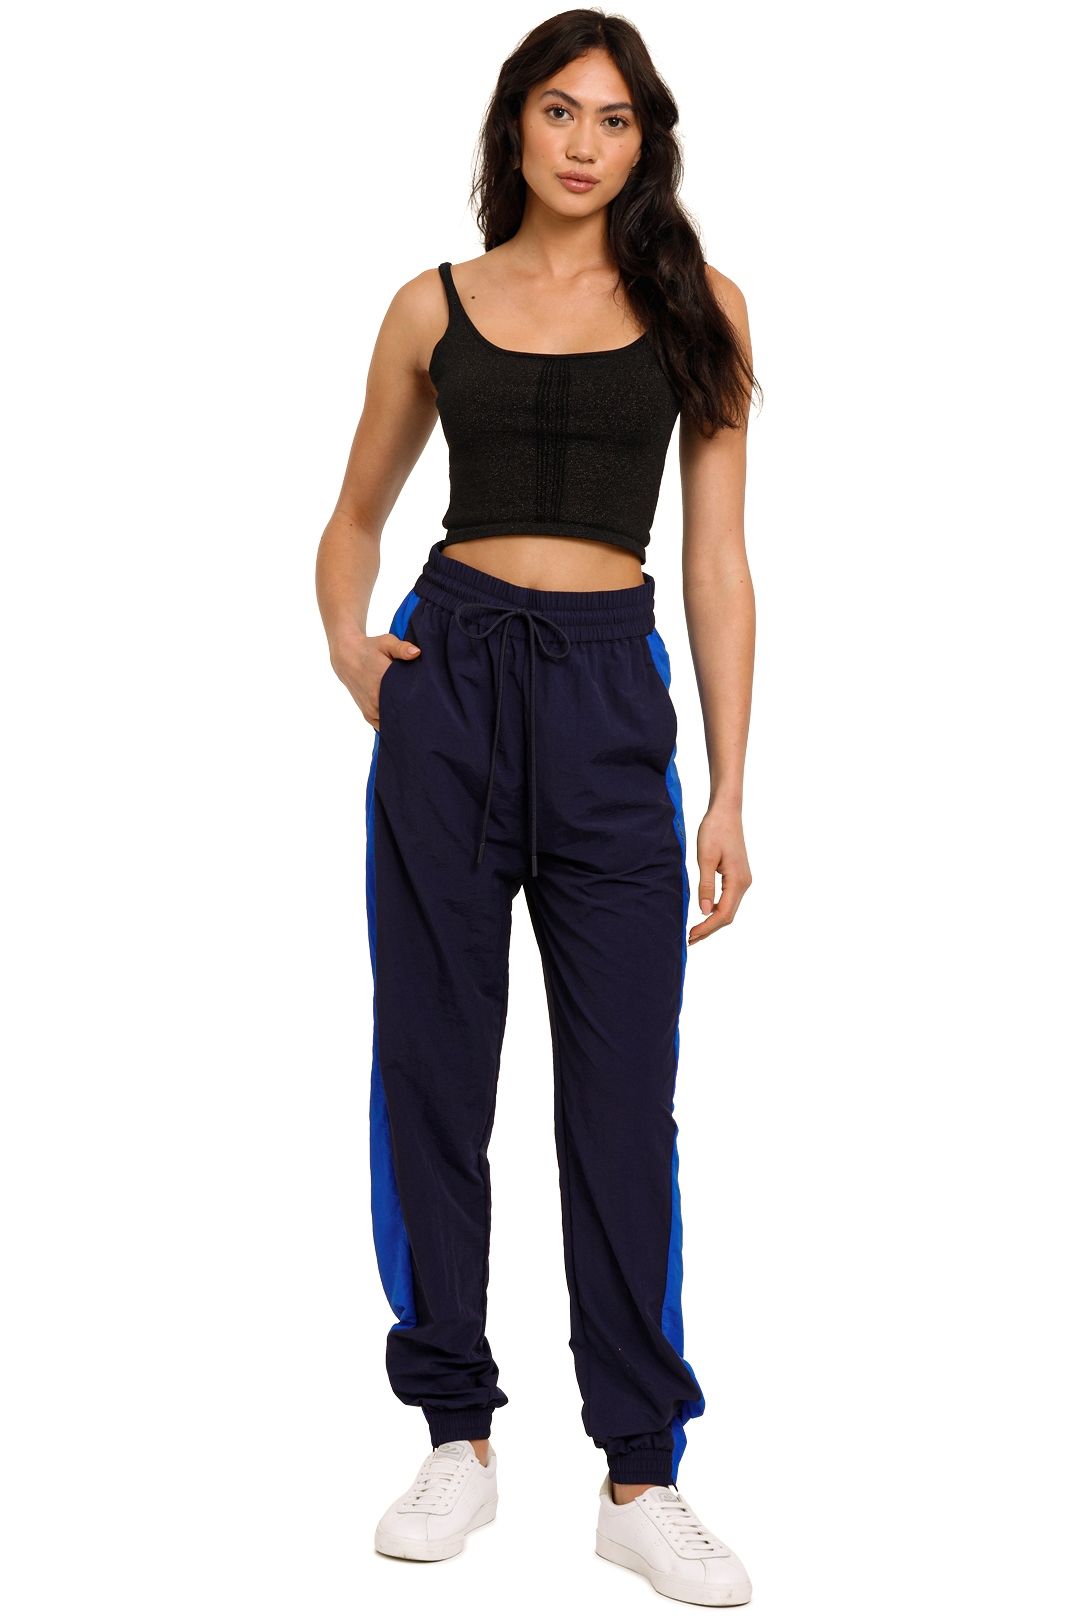 C&M Camilla And Marc Jukes Track Pant blue